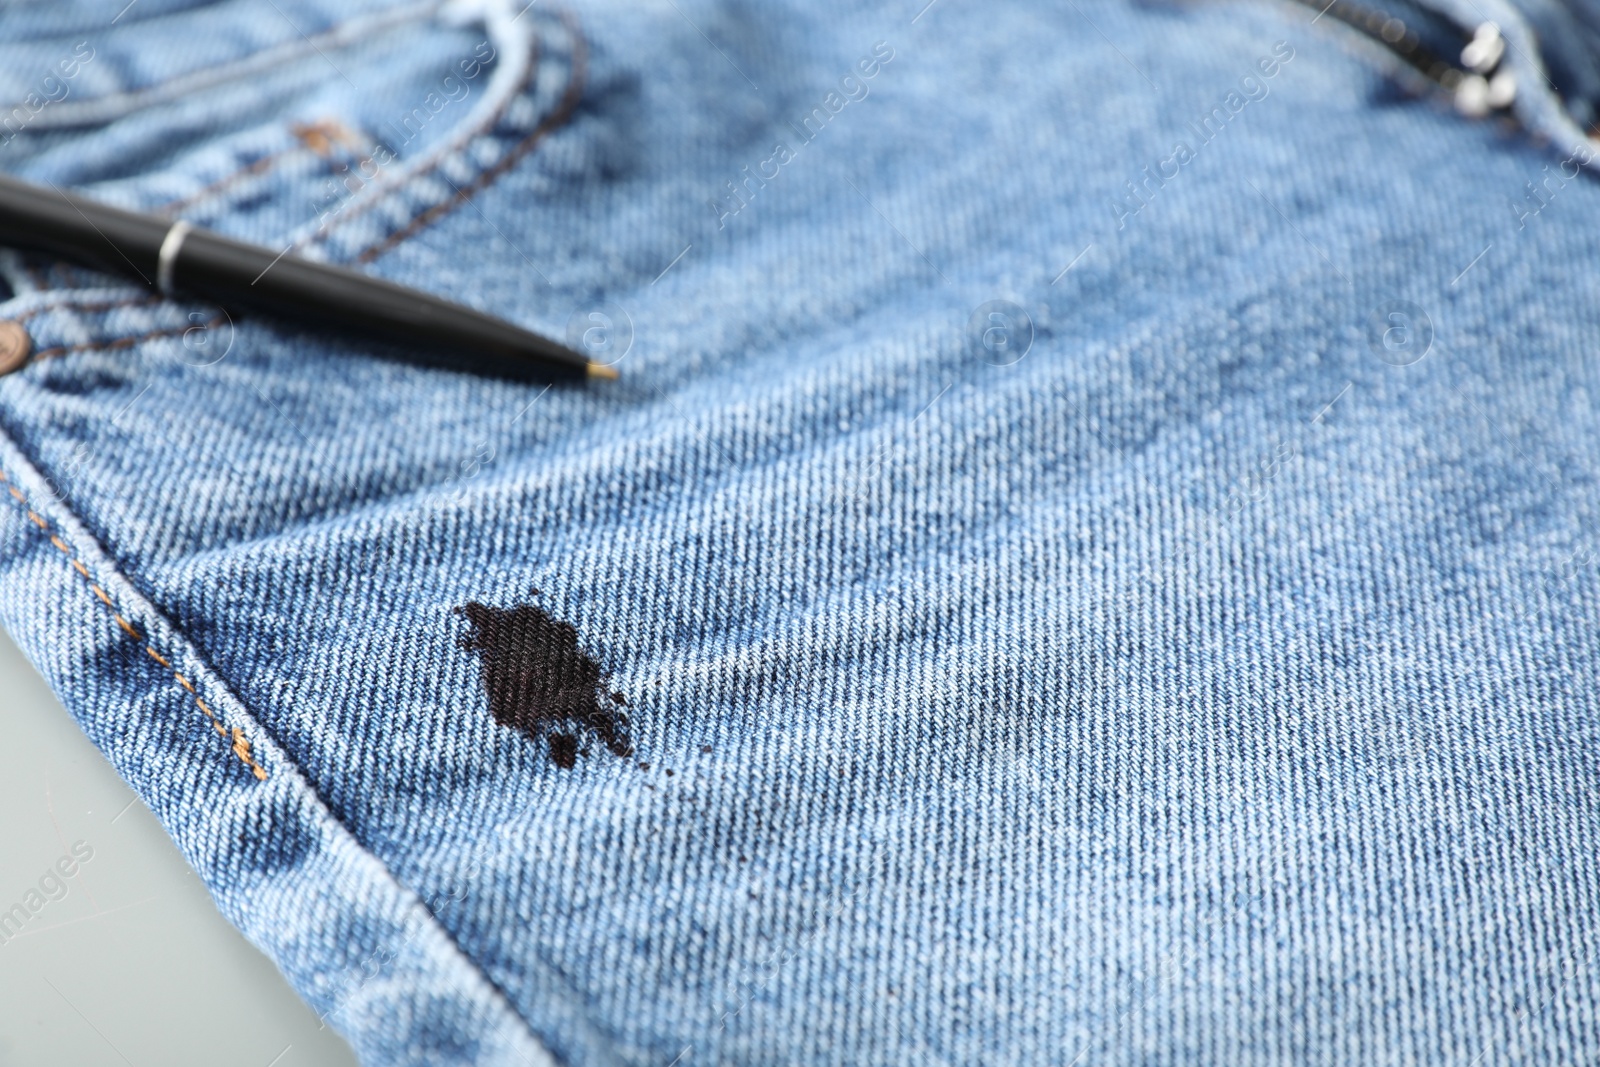 Photo of Pen and stain of black ink on jeans, closeup. Space for text